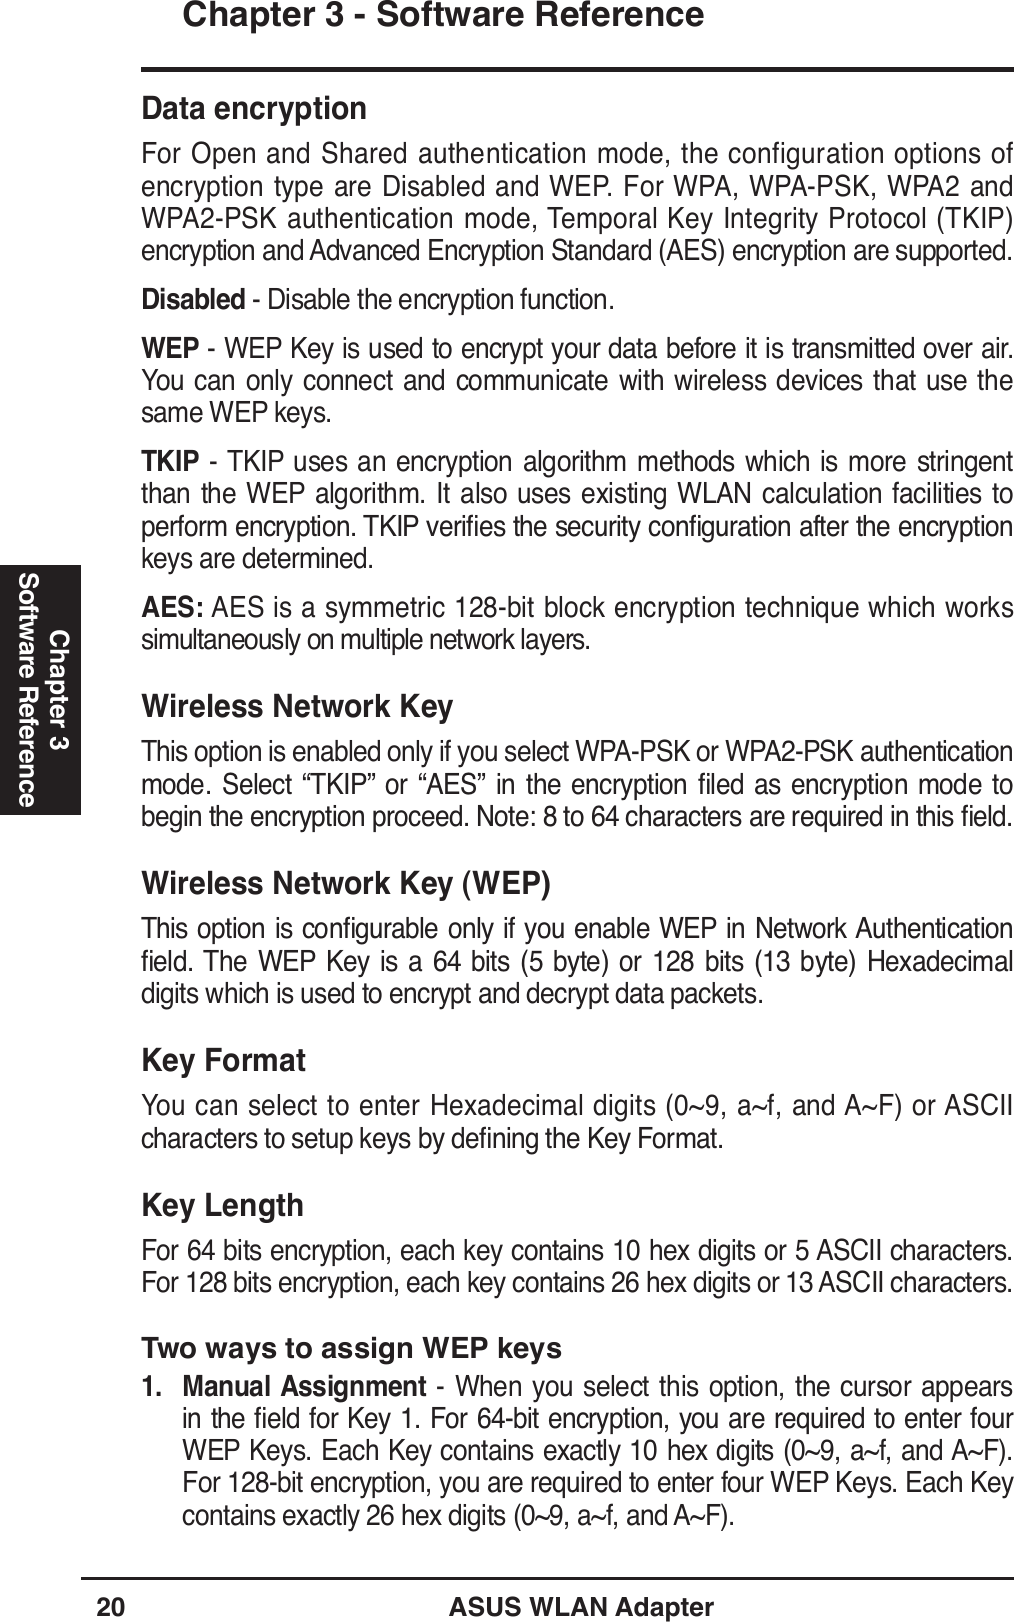 20 ASUS WLAN AdapterChapter 3 - Software ReferenceChapter 3Software ReferenceData encryptionFor Open and Shared authentication mode, the configuration options of encryption type are Disabled and WEP. For WPA, WPA-PSK, WPA2 and WPA2-PSK authentication mode, Temporal Key Integrity Protocol (TKIP) encryption and Advanced Encryption Standard (AES) encryption are supported.Disabled - Disable the encryption function.WEP - WEP Key is used to encrypt your data before it is transmitted over air. You can only connect and communicate with wireless devices that use the same WEP keys.TKIP - TKIP uses an encryption algorithm methods which is more stringent than the WEP algorithm. It also uses existing WLAN calculation facilities to SHUIRUPHQFU\SWLRQ7.,3YHULÀHVWKHVHFXULW\FRQÀJXUDWLRQDIWHUWKHHQFU\SWLRQkeys are determined.AES: AES is a symmetric 128-bit block encryption technique which works simultaneously on multiple network layers.Wireless Network KeyThis option is enabled only if you select WPA-PSK or WPA2-PSK authentication PRGH 6HOHFW ´7.,3µ RU ´$(6µ LQ WKH HQFU\SWLRQ ÀOHG DV HQFU\SWLRQ PRGH WREHJLQWKHHQFU\SWLRQSURFHHG1RWHWRFKDUDFWHUVDUHUHTXLUHGLQWKLVÀHOGWireless Network Key (WEP)7KLVRSWLRQLVFRQÀJXUDEOHRQO\LI\RX HQDEOH:(3LQ1HWZRUN$XWKHQWLFDWLRQÀHOG7KH :(3 .H\ LV D  ELWV  E\WH RU  ELWV  E\WH +H[DGHFLPDOdigits which is used to encrypt and decrypt data packets.Key FormatYou can select to enter Hexadecimal digits (0~9, a~f, and A~F) or ASCII FKDUDFWHUVWRVHWXSNH\VE\GHÀQLQJWKH.H\)RUPDWKey LengthFor 64 bits encryption, each key contains 10 hex digits or 5 ASCII characters. For 128 bits encryption, each key contains 26 hex digits or 13 ASCII characters.Two ways to assign WEP keys1. Manual Assignment - When you select this option, the cursor appears LQWKHÀHOGIRU.H\)RUELWHQFU\SWLRQ\RXDUHUHTXLUHGWRHQWHUIRXUWEP Keys. Each Key contains exactly 10 hex digits (0~9, a~f, and A~F). For 128-bit encryption, you are required to enter four WEP Keys. Each Key contains exactly 26 hex digits (0~9, a~f, and A~F).